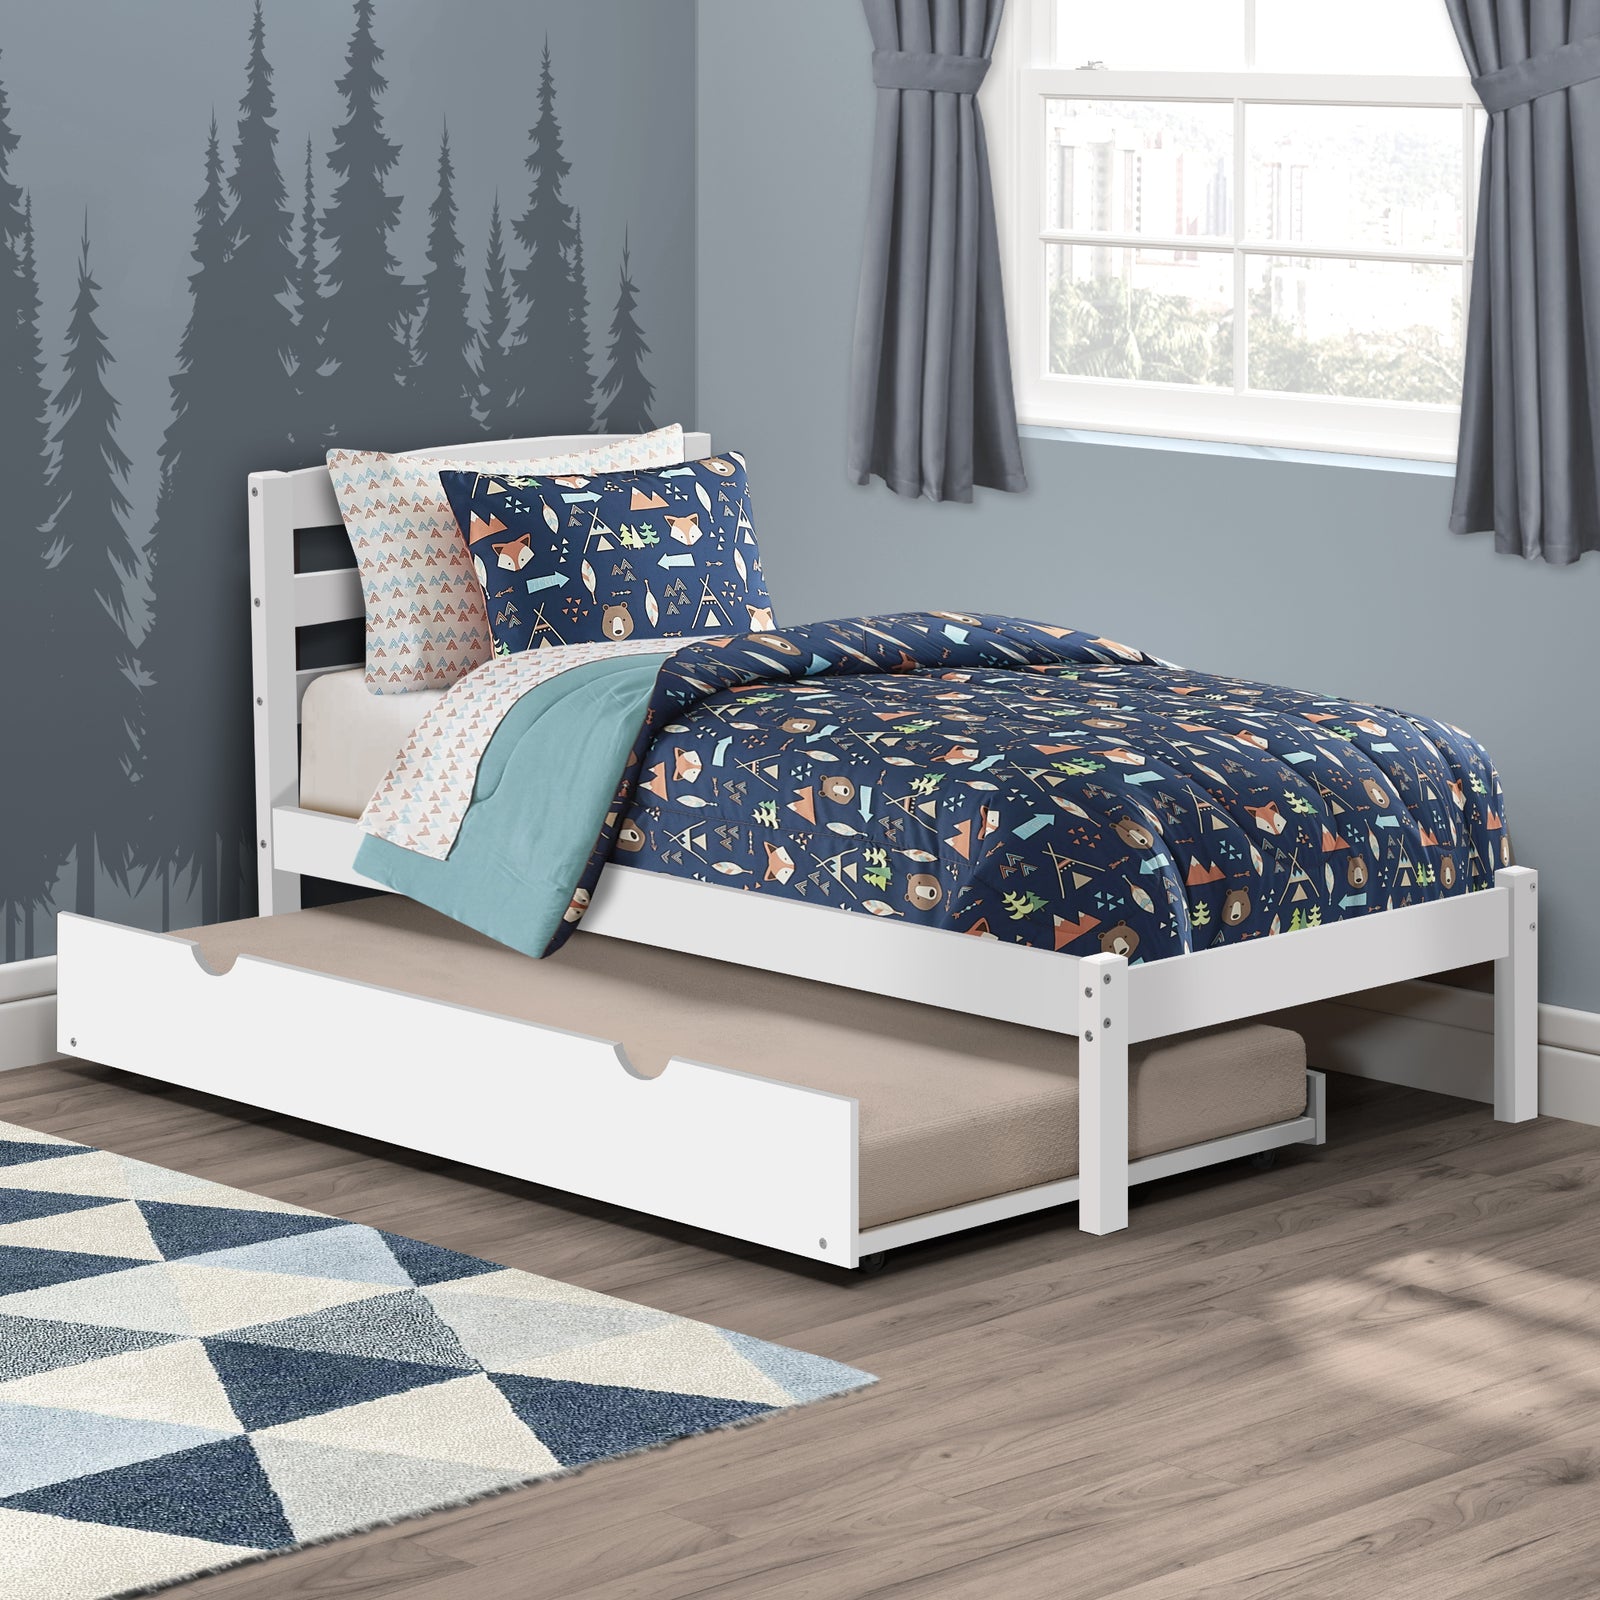 Pkolino Twin Bed With Trundle White